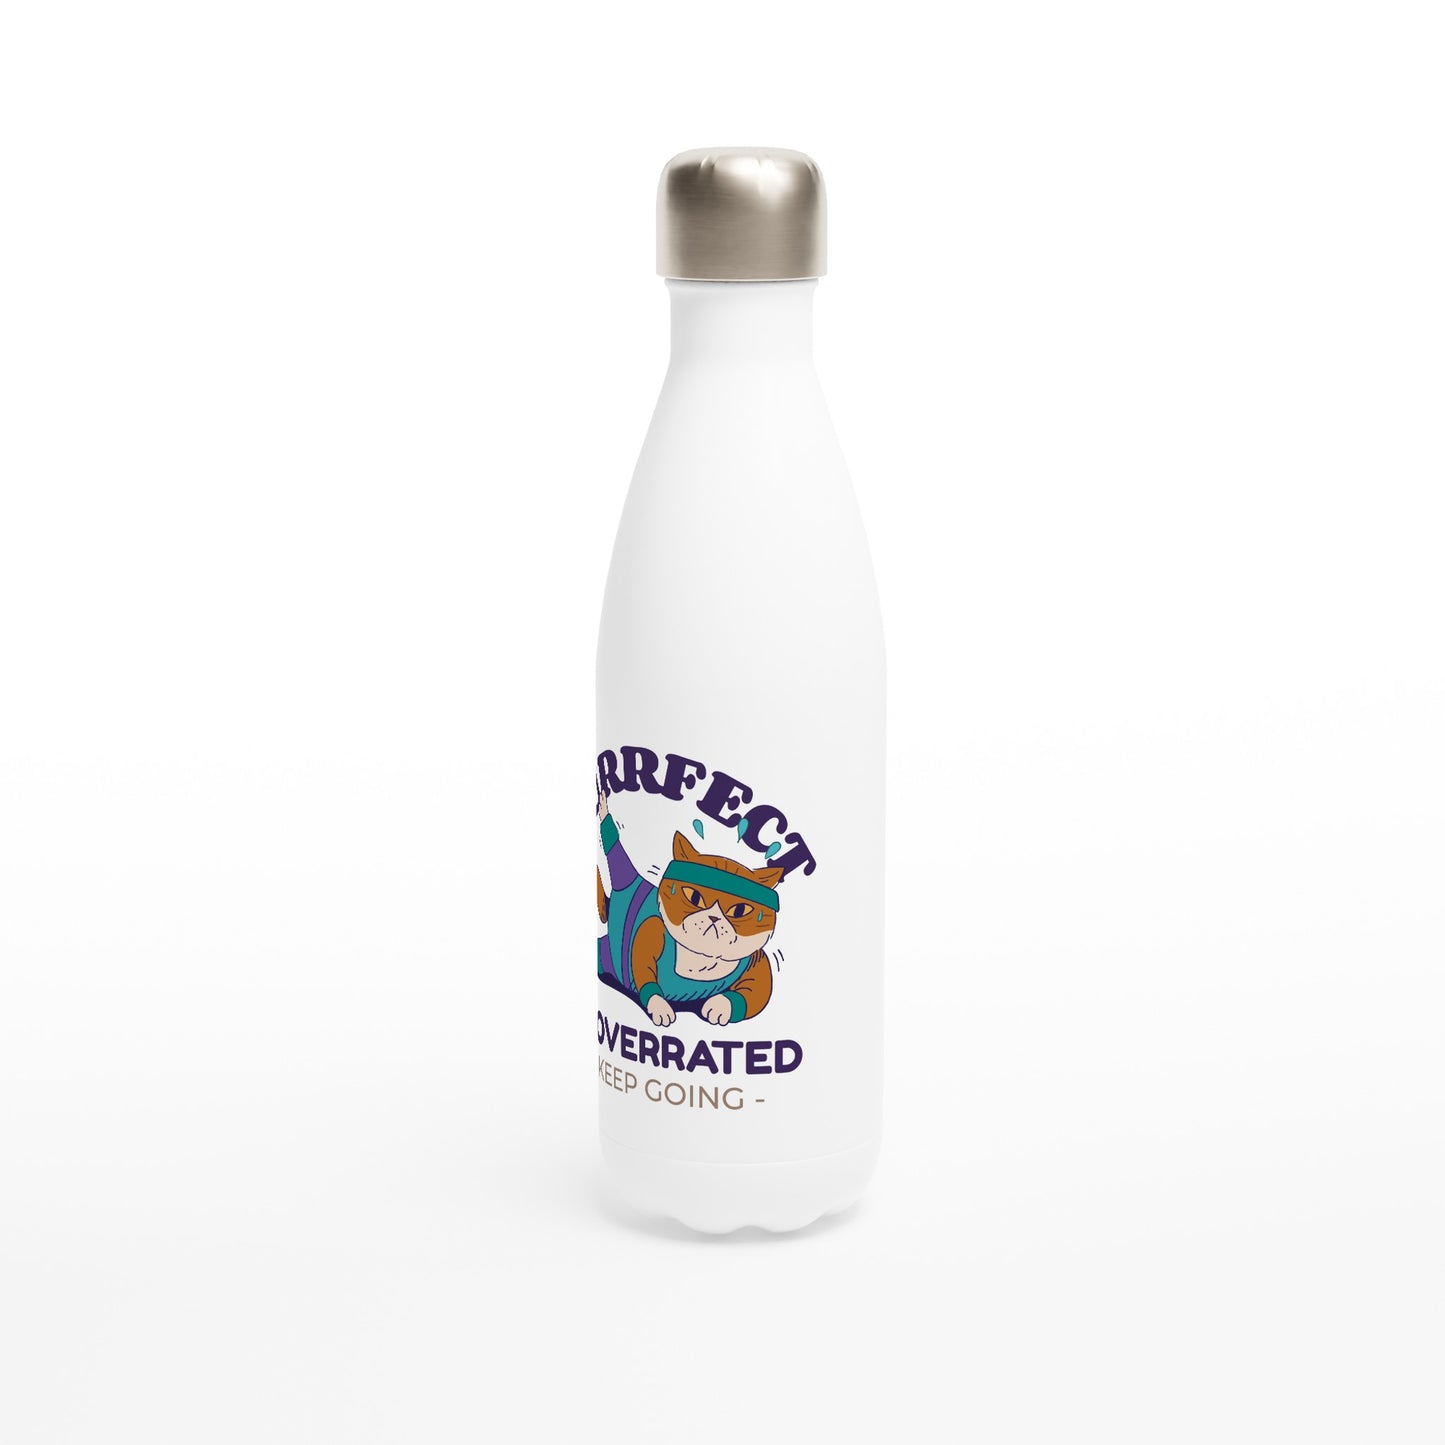 Purrfect Is Overrated - White 17oz Stainless Steel Water Bottle White Water Bottle animal Fitness